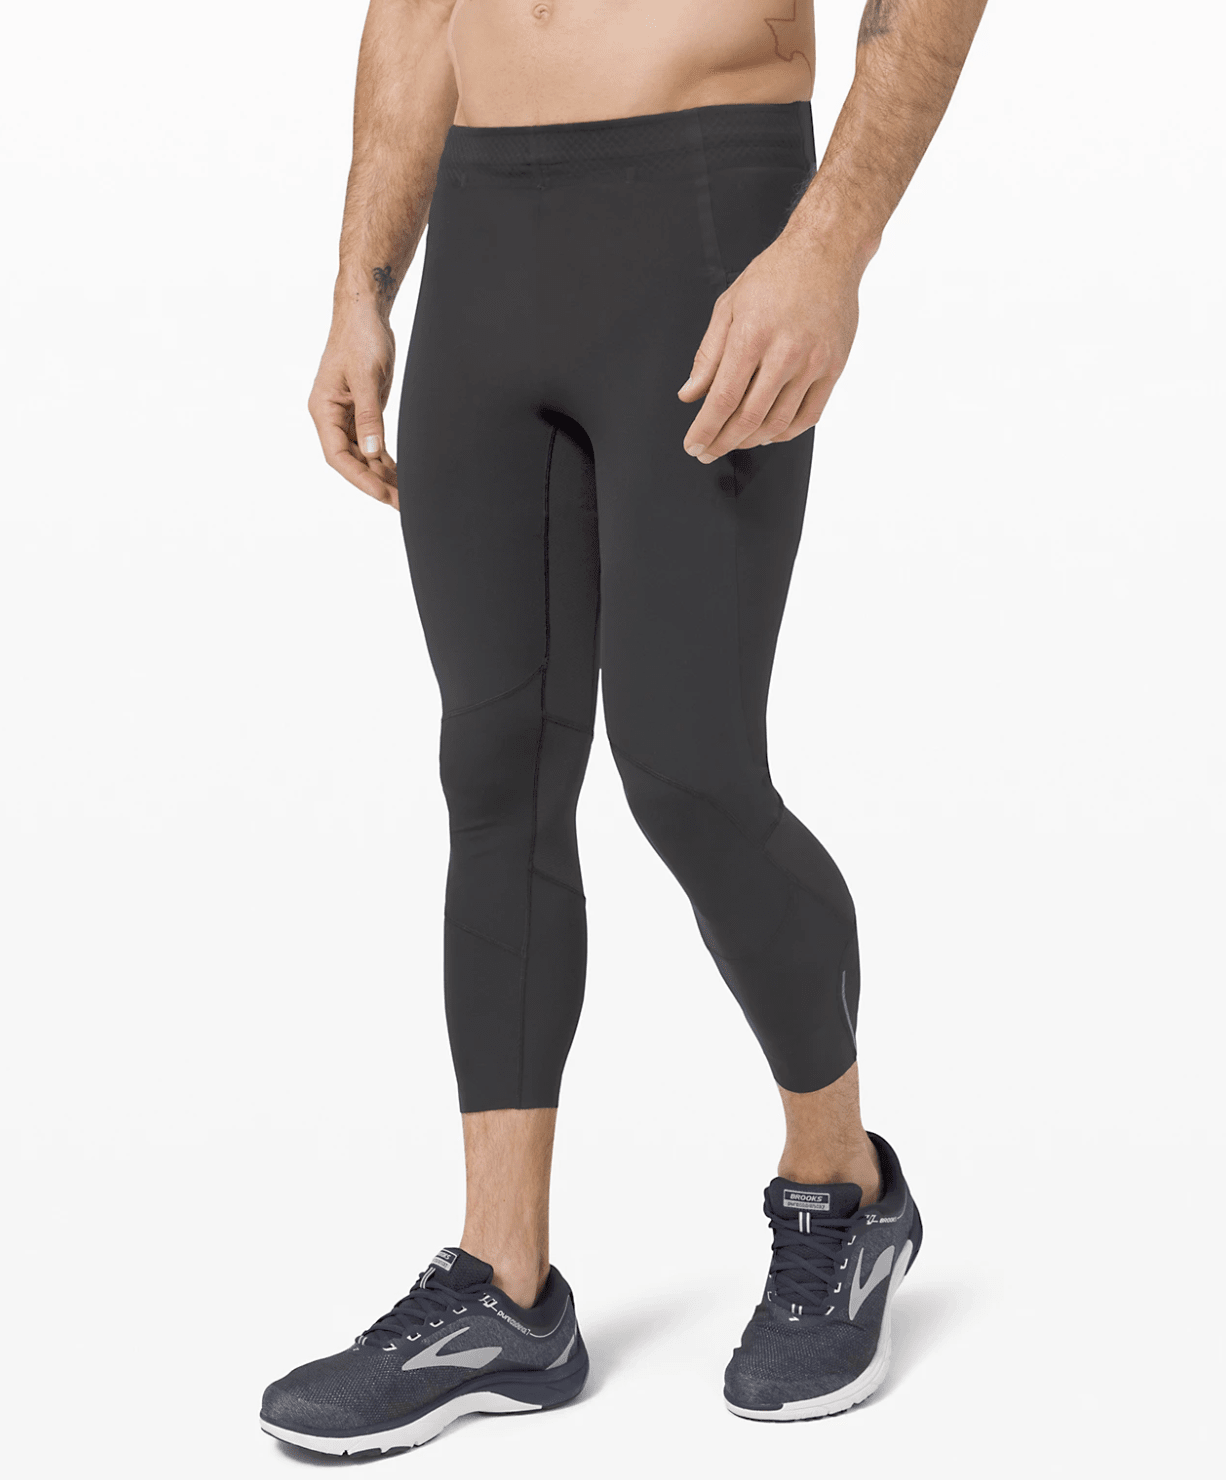 best workout tights that stay up